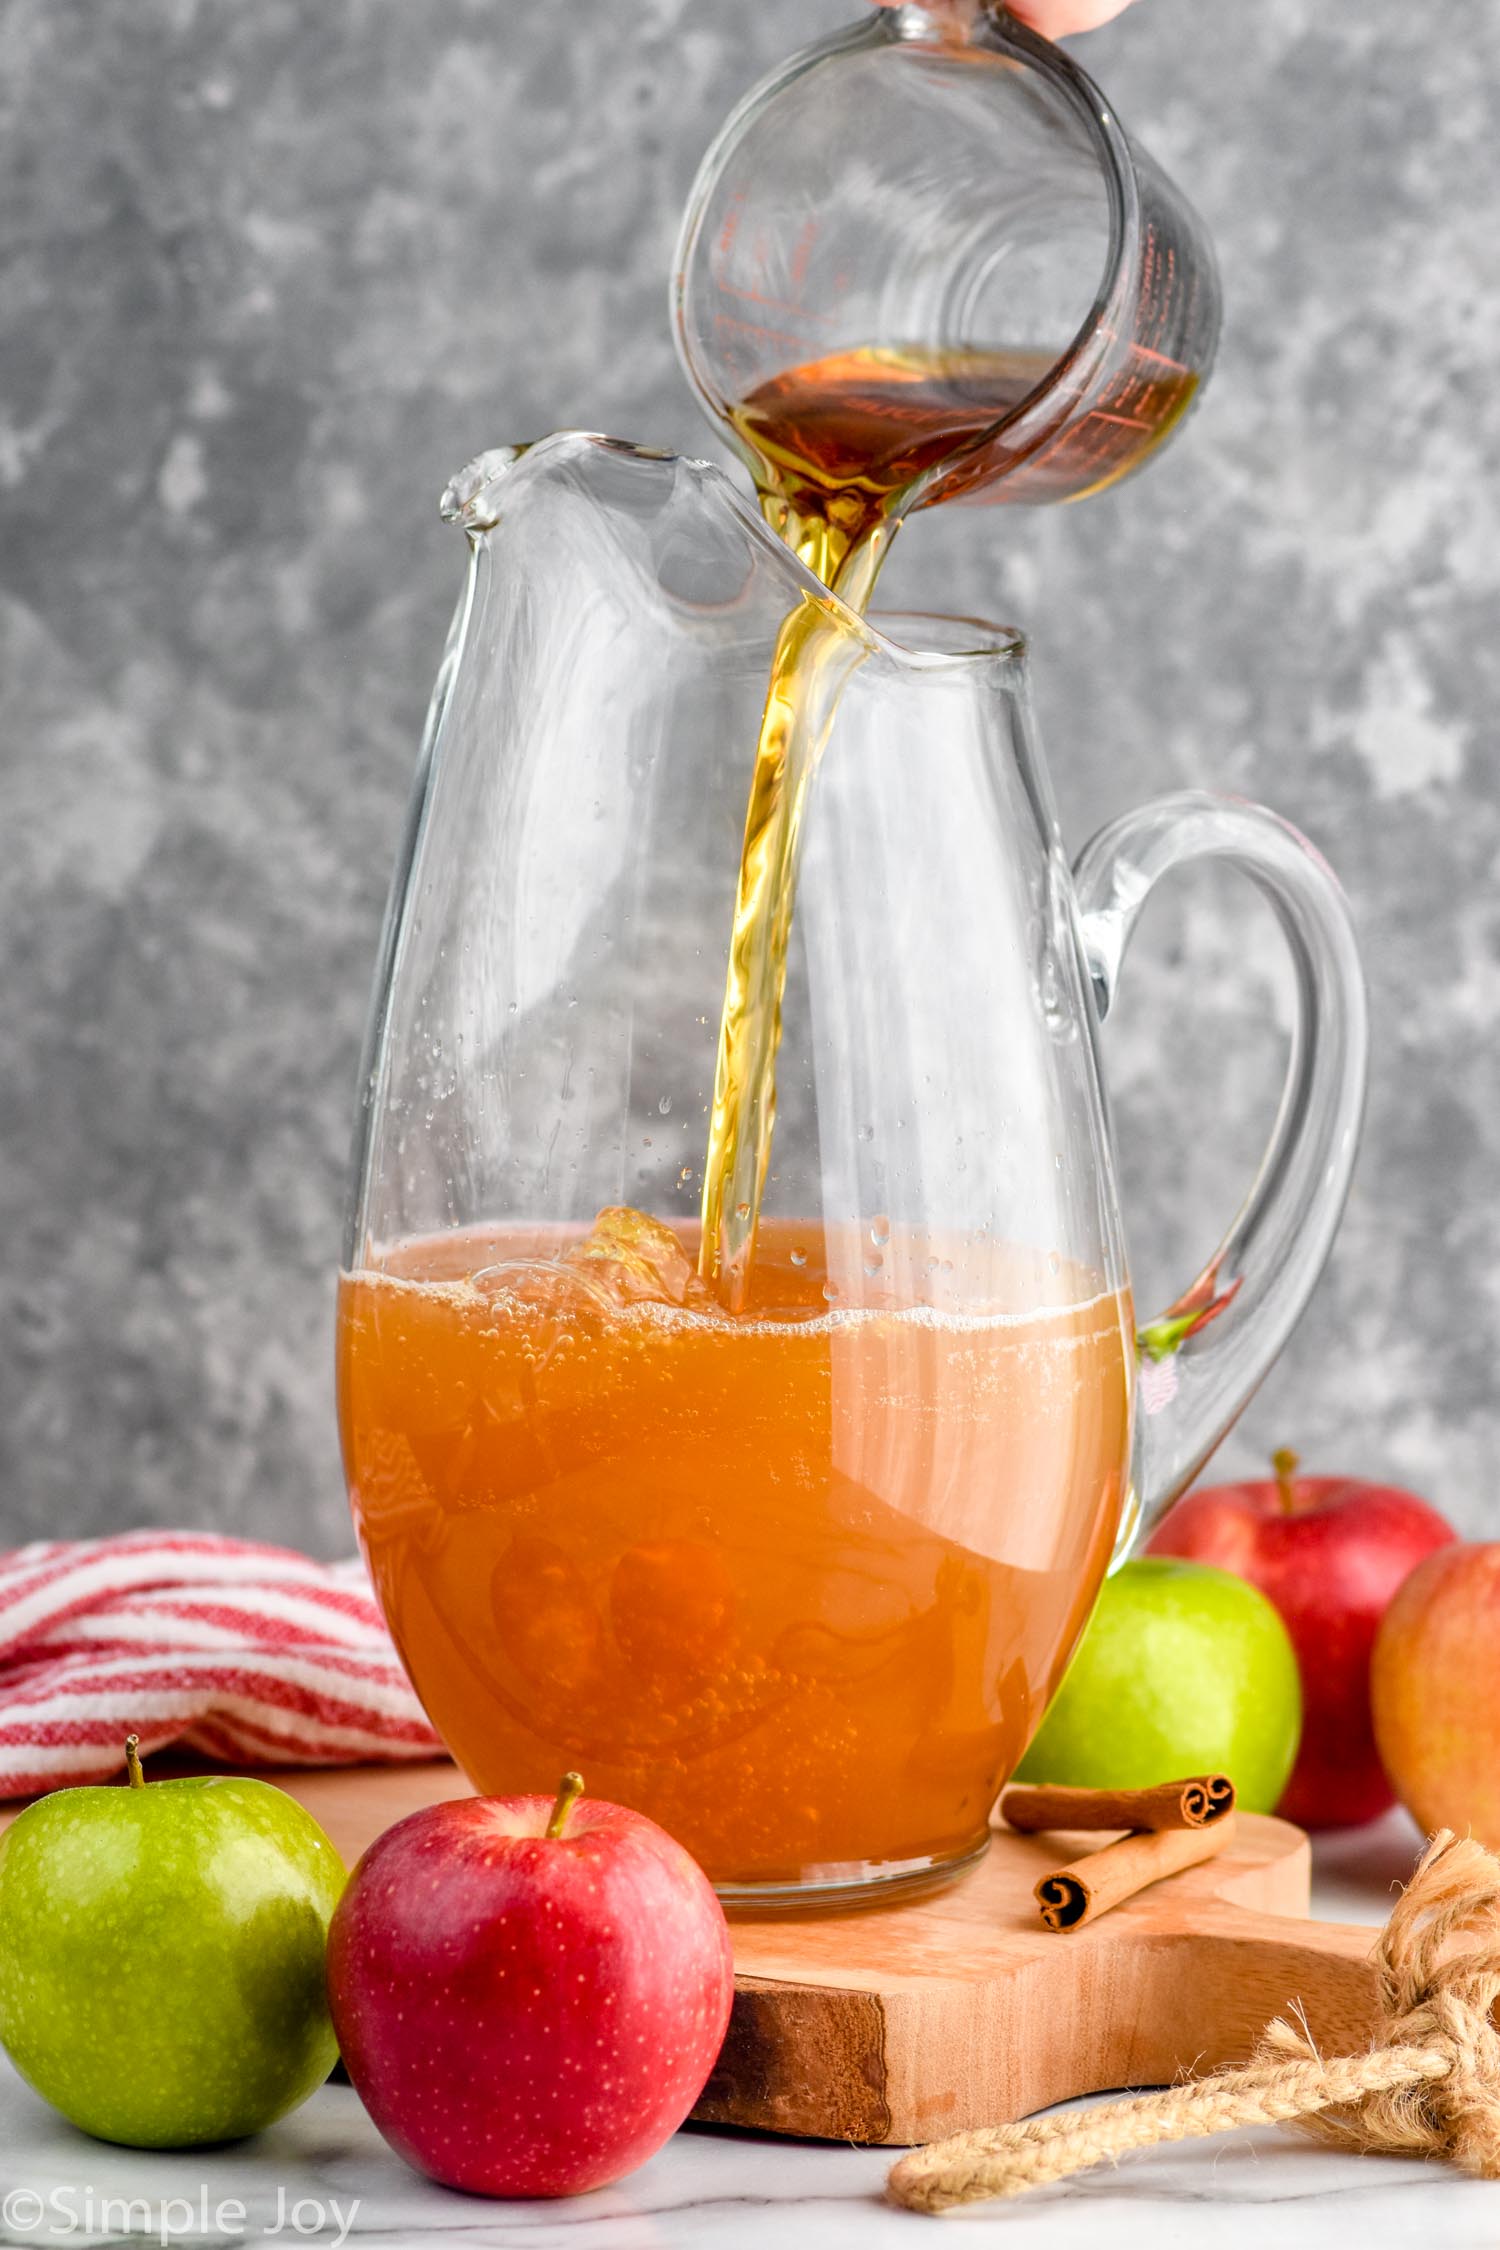 Side view of ingredients being poured into pitcher for Apple Cider Sangria recipe. Apples and cinnamon sticks beside pitcher.